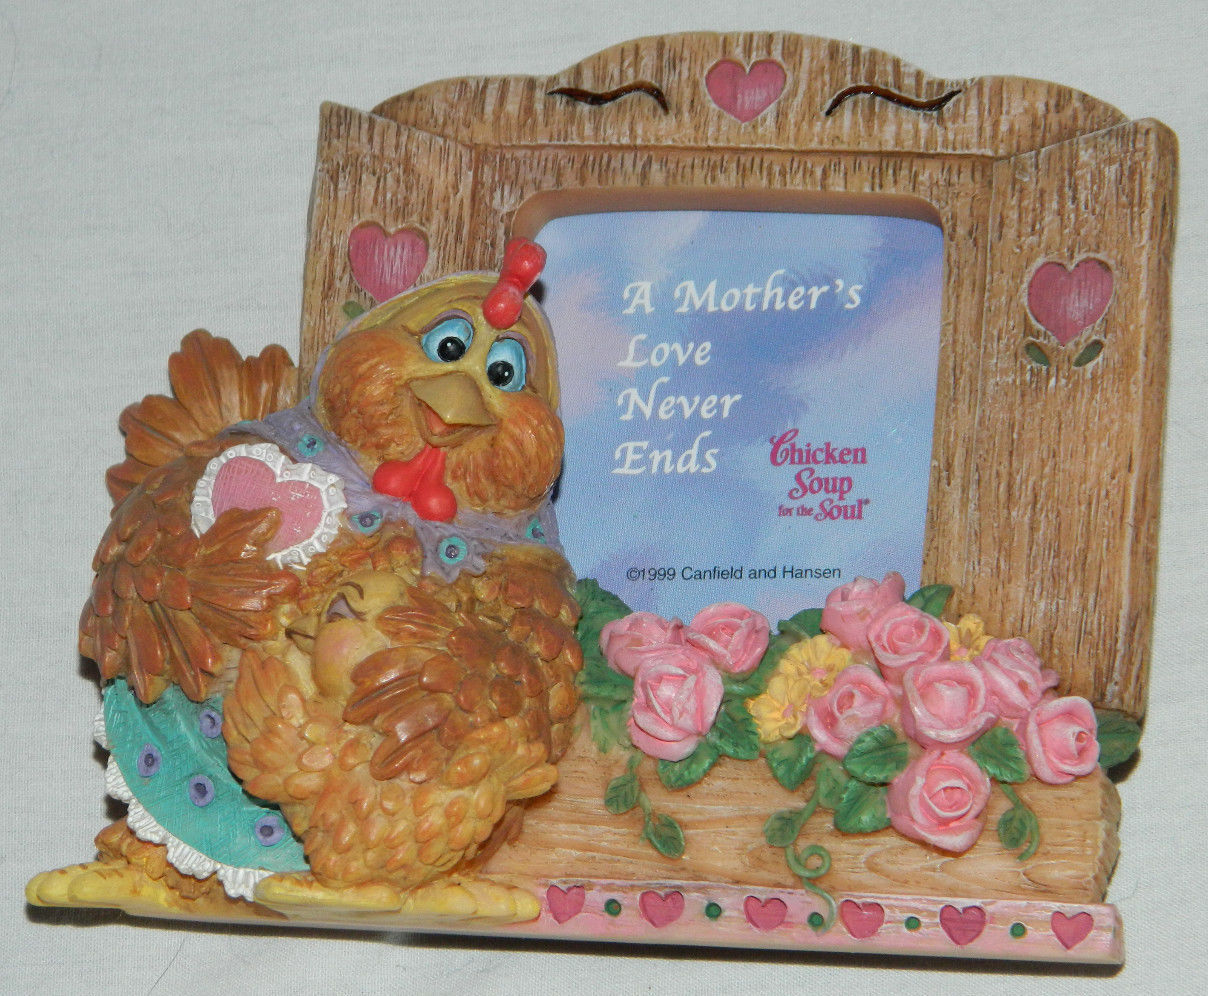 1999 Dreamsicles Cast Art Brand Photo Frame "A Mothers Love Never Ends" with Box - $9.46